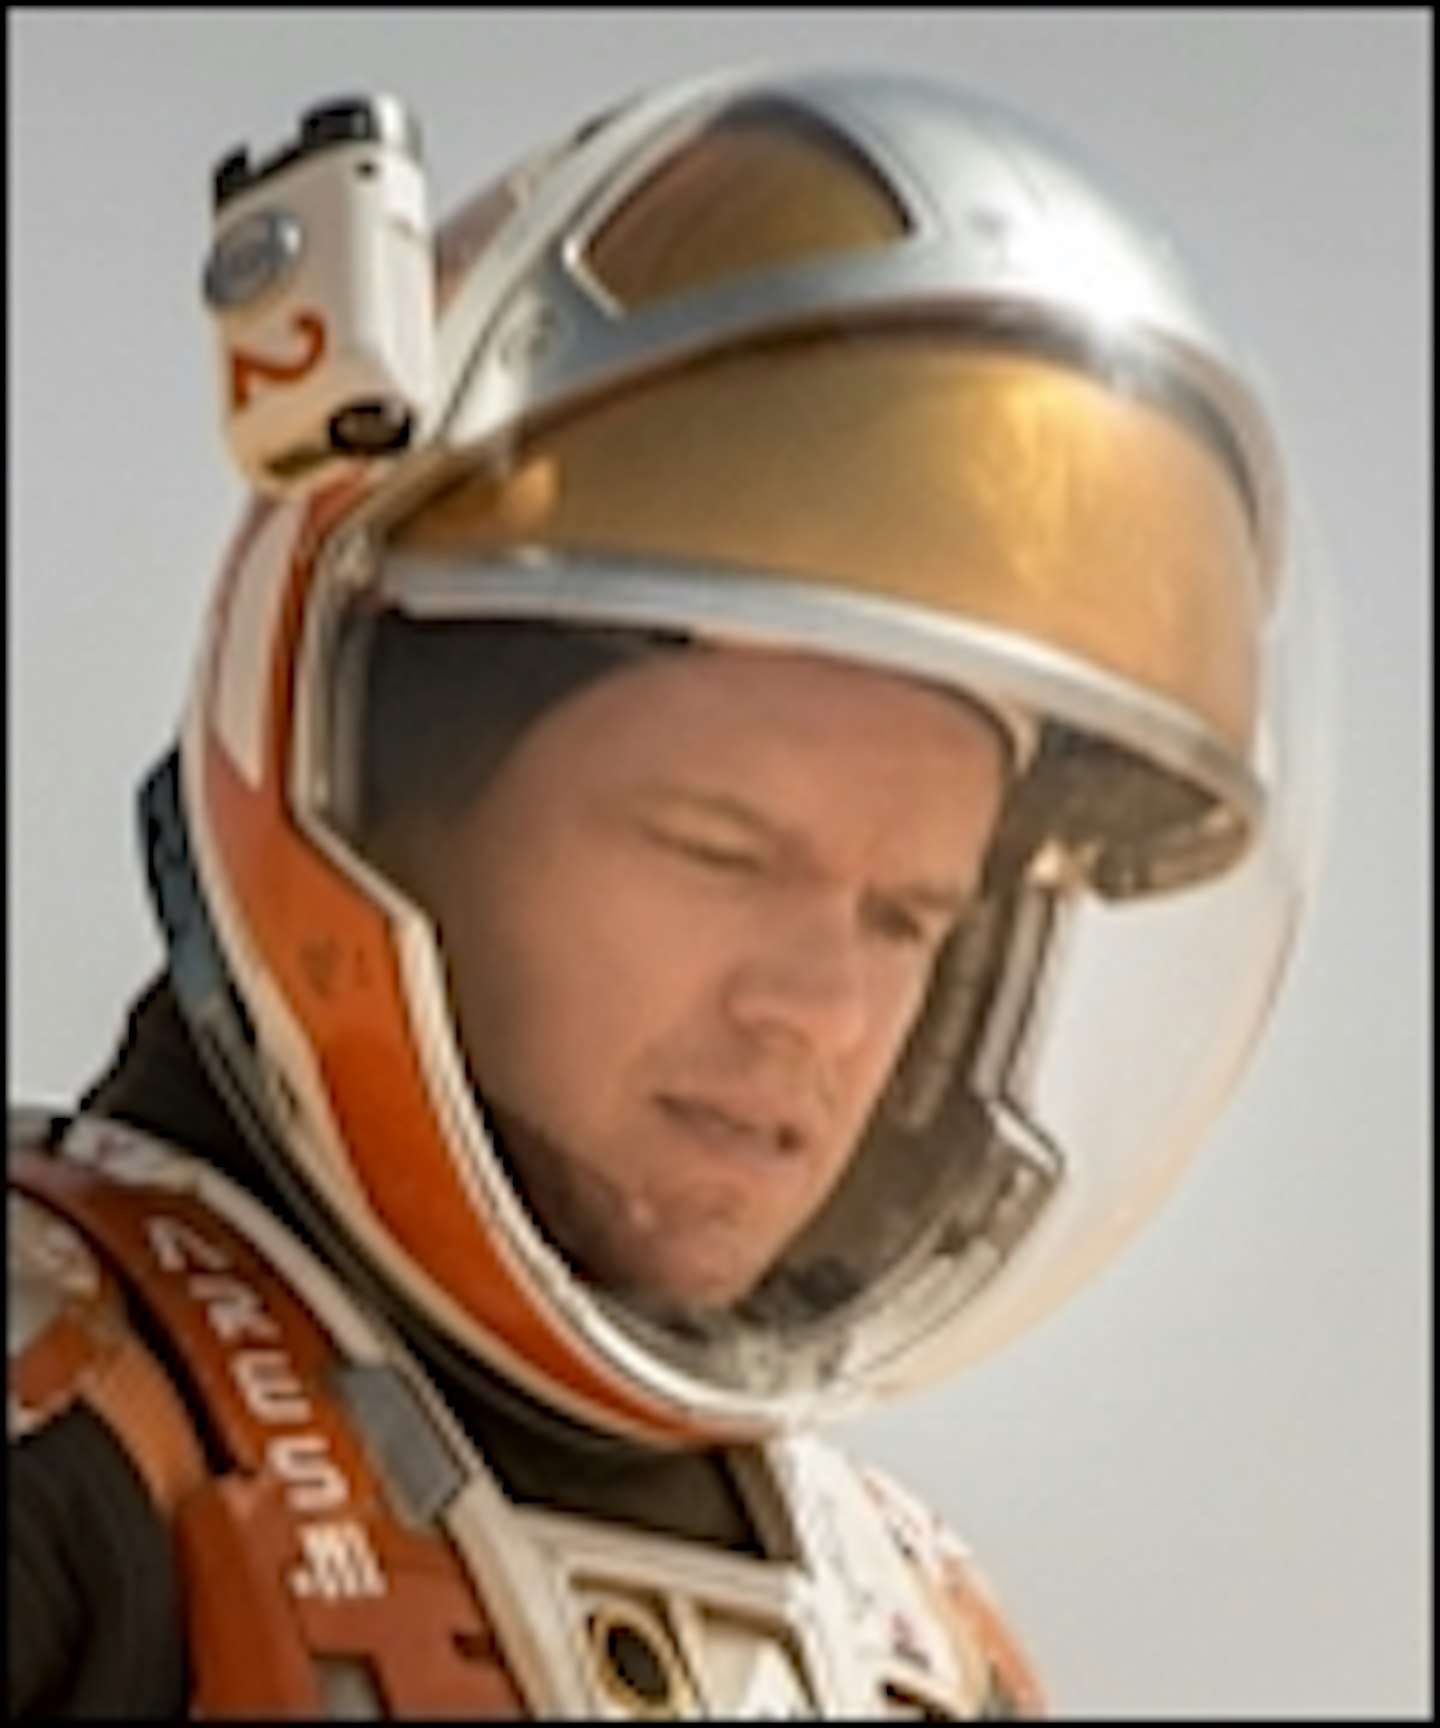 New Imagery For The Martian